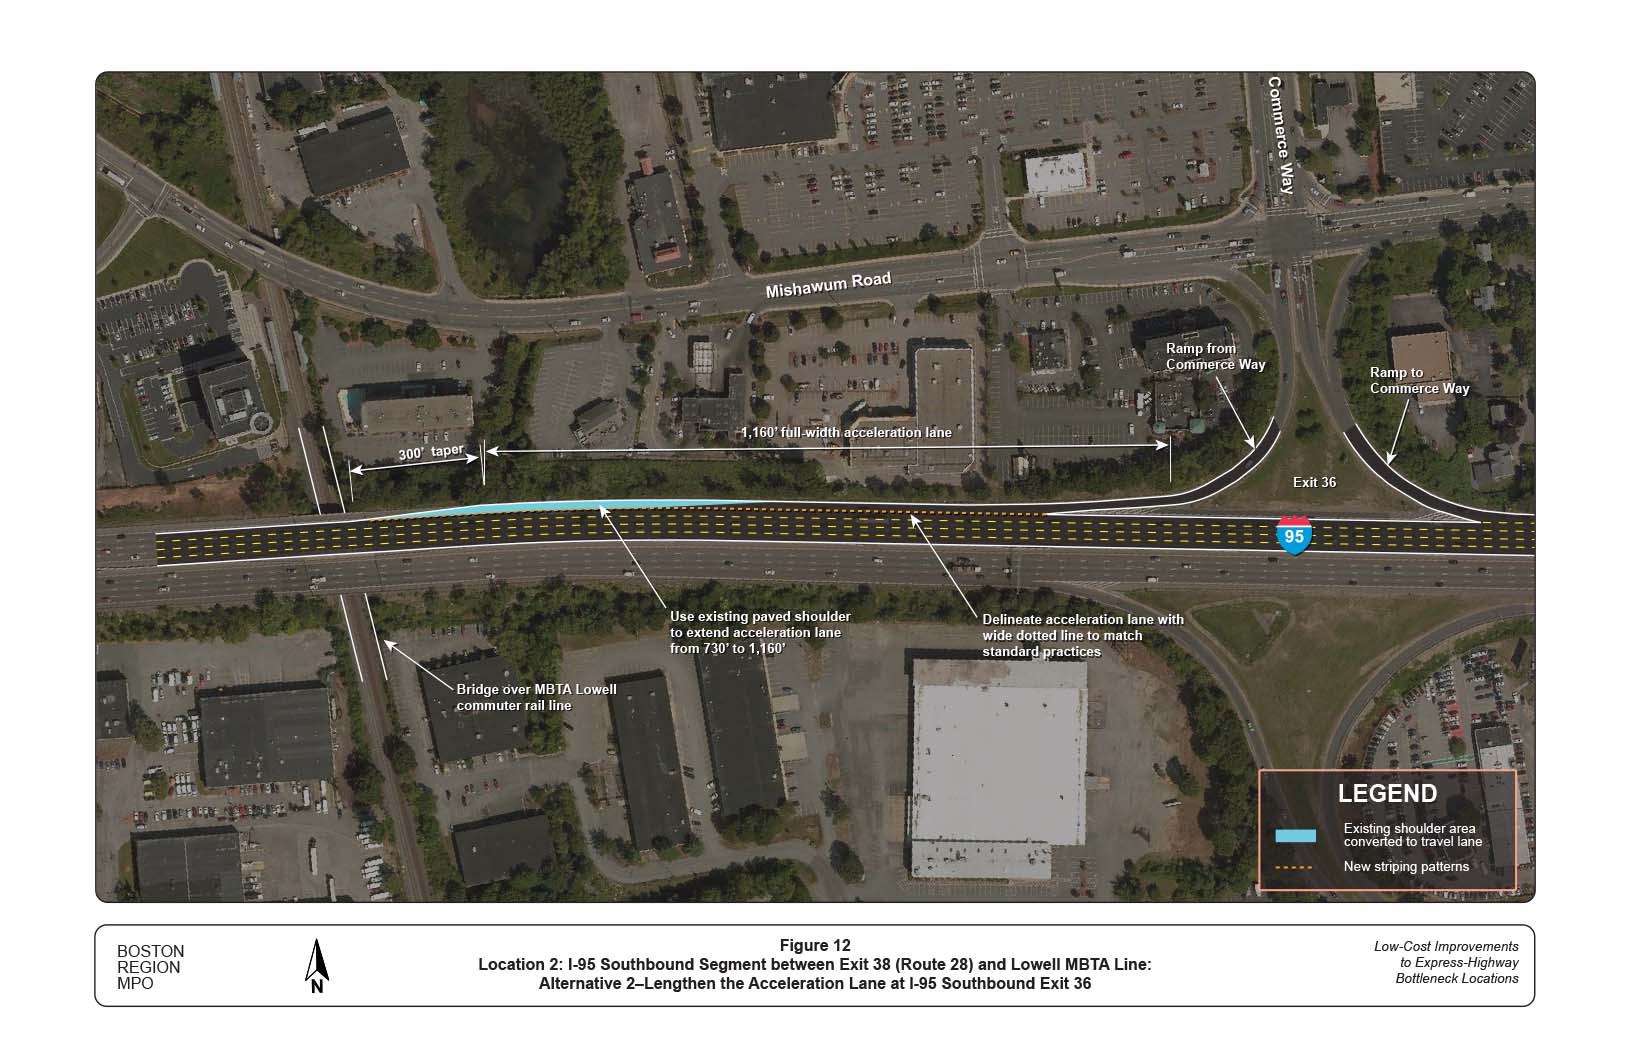 FIGURE 12. Location 2: I-95 Southbound Segment between Exit 38 (Route 28) and Lowell MBTA Line: Alternative 2–Lengthen the Acceleration Lane at I-95 Southbound Exit 36
Figure 12 shows the extension of a full-width acceleration lane at the Exit 36 on-ramp by 460 feet, which would lengthen it from 700 feet to 1,160 feet. 
